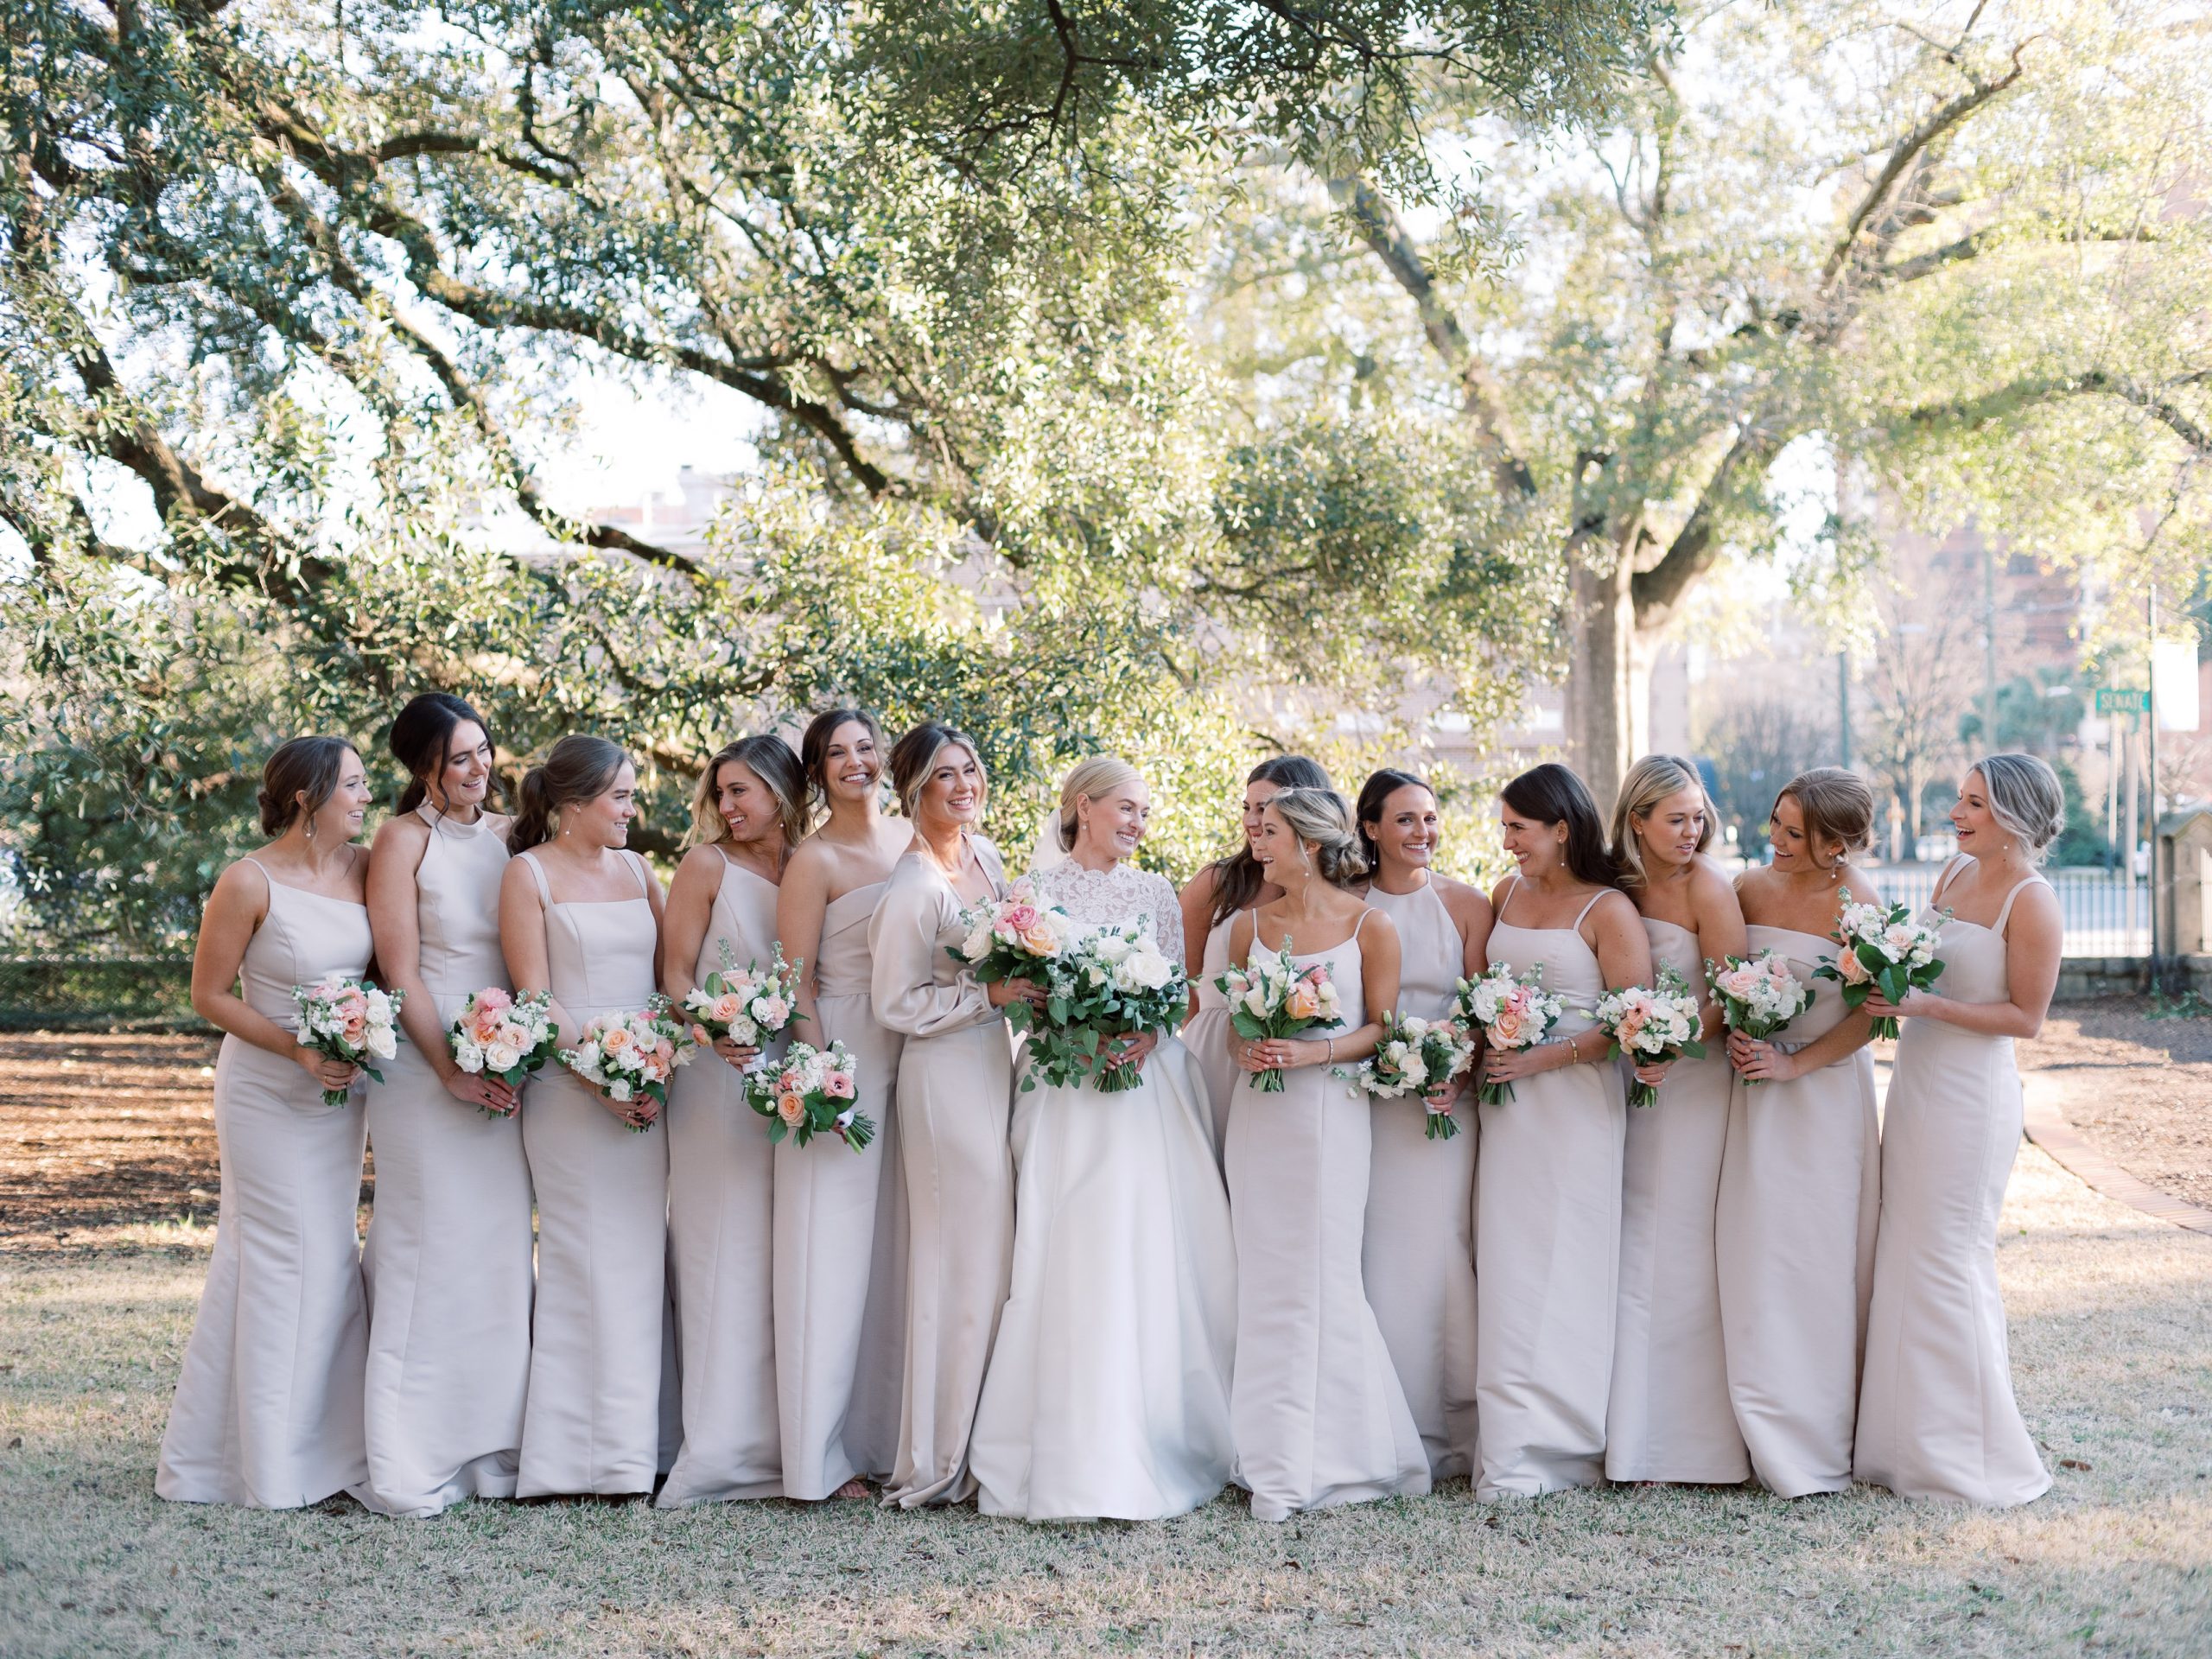 Bridesmaids joined Meg in the courtyard of Trinity Episcopal Cathedral carrying lovely bouquets including pink roses, white stock, and peach ranunculus. Anne Townsend Wakefield, Lauren McCorquodale, Ida Bland, Caroline Sewell, Paige Bryant, maid-of-honor Kate Evans, Meg Evans Bates, Allie Roper, Liz Holcomb, Ari DeLucy, Grayson Stribling, Mary Collins, Cameron Smith, Anna Orlandini. 